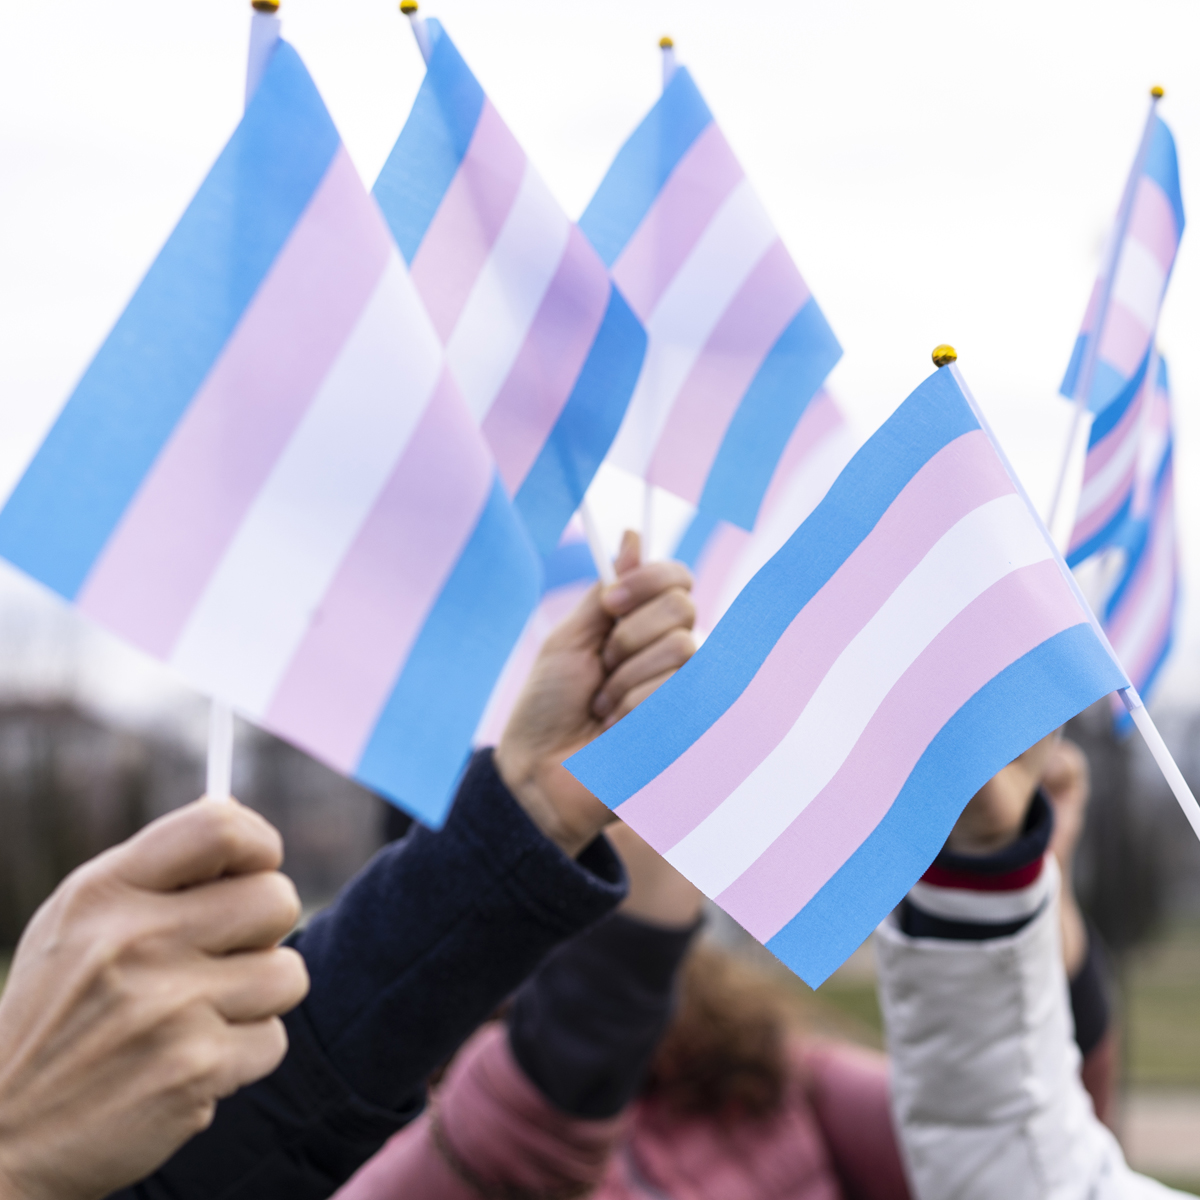 Trans visibility starts by upholding trans human rights